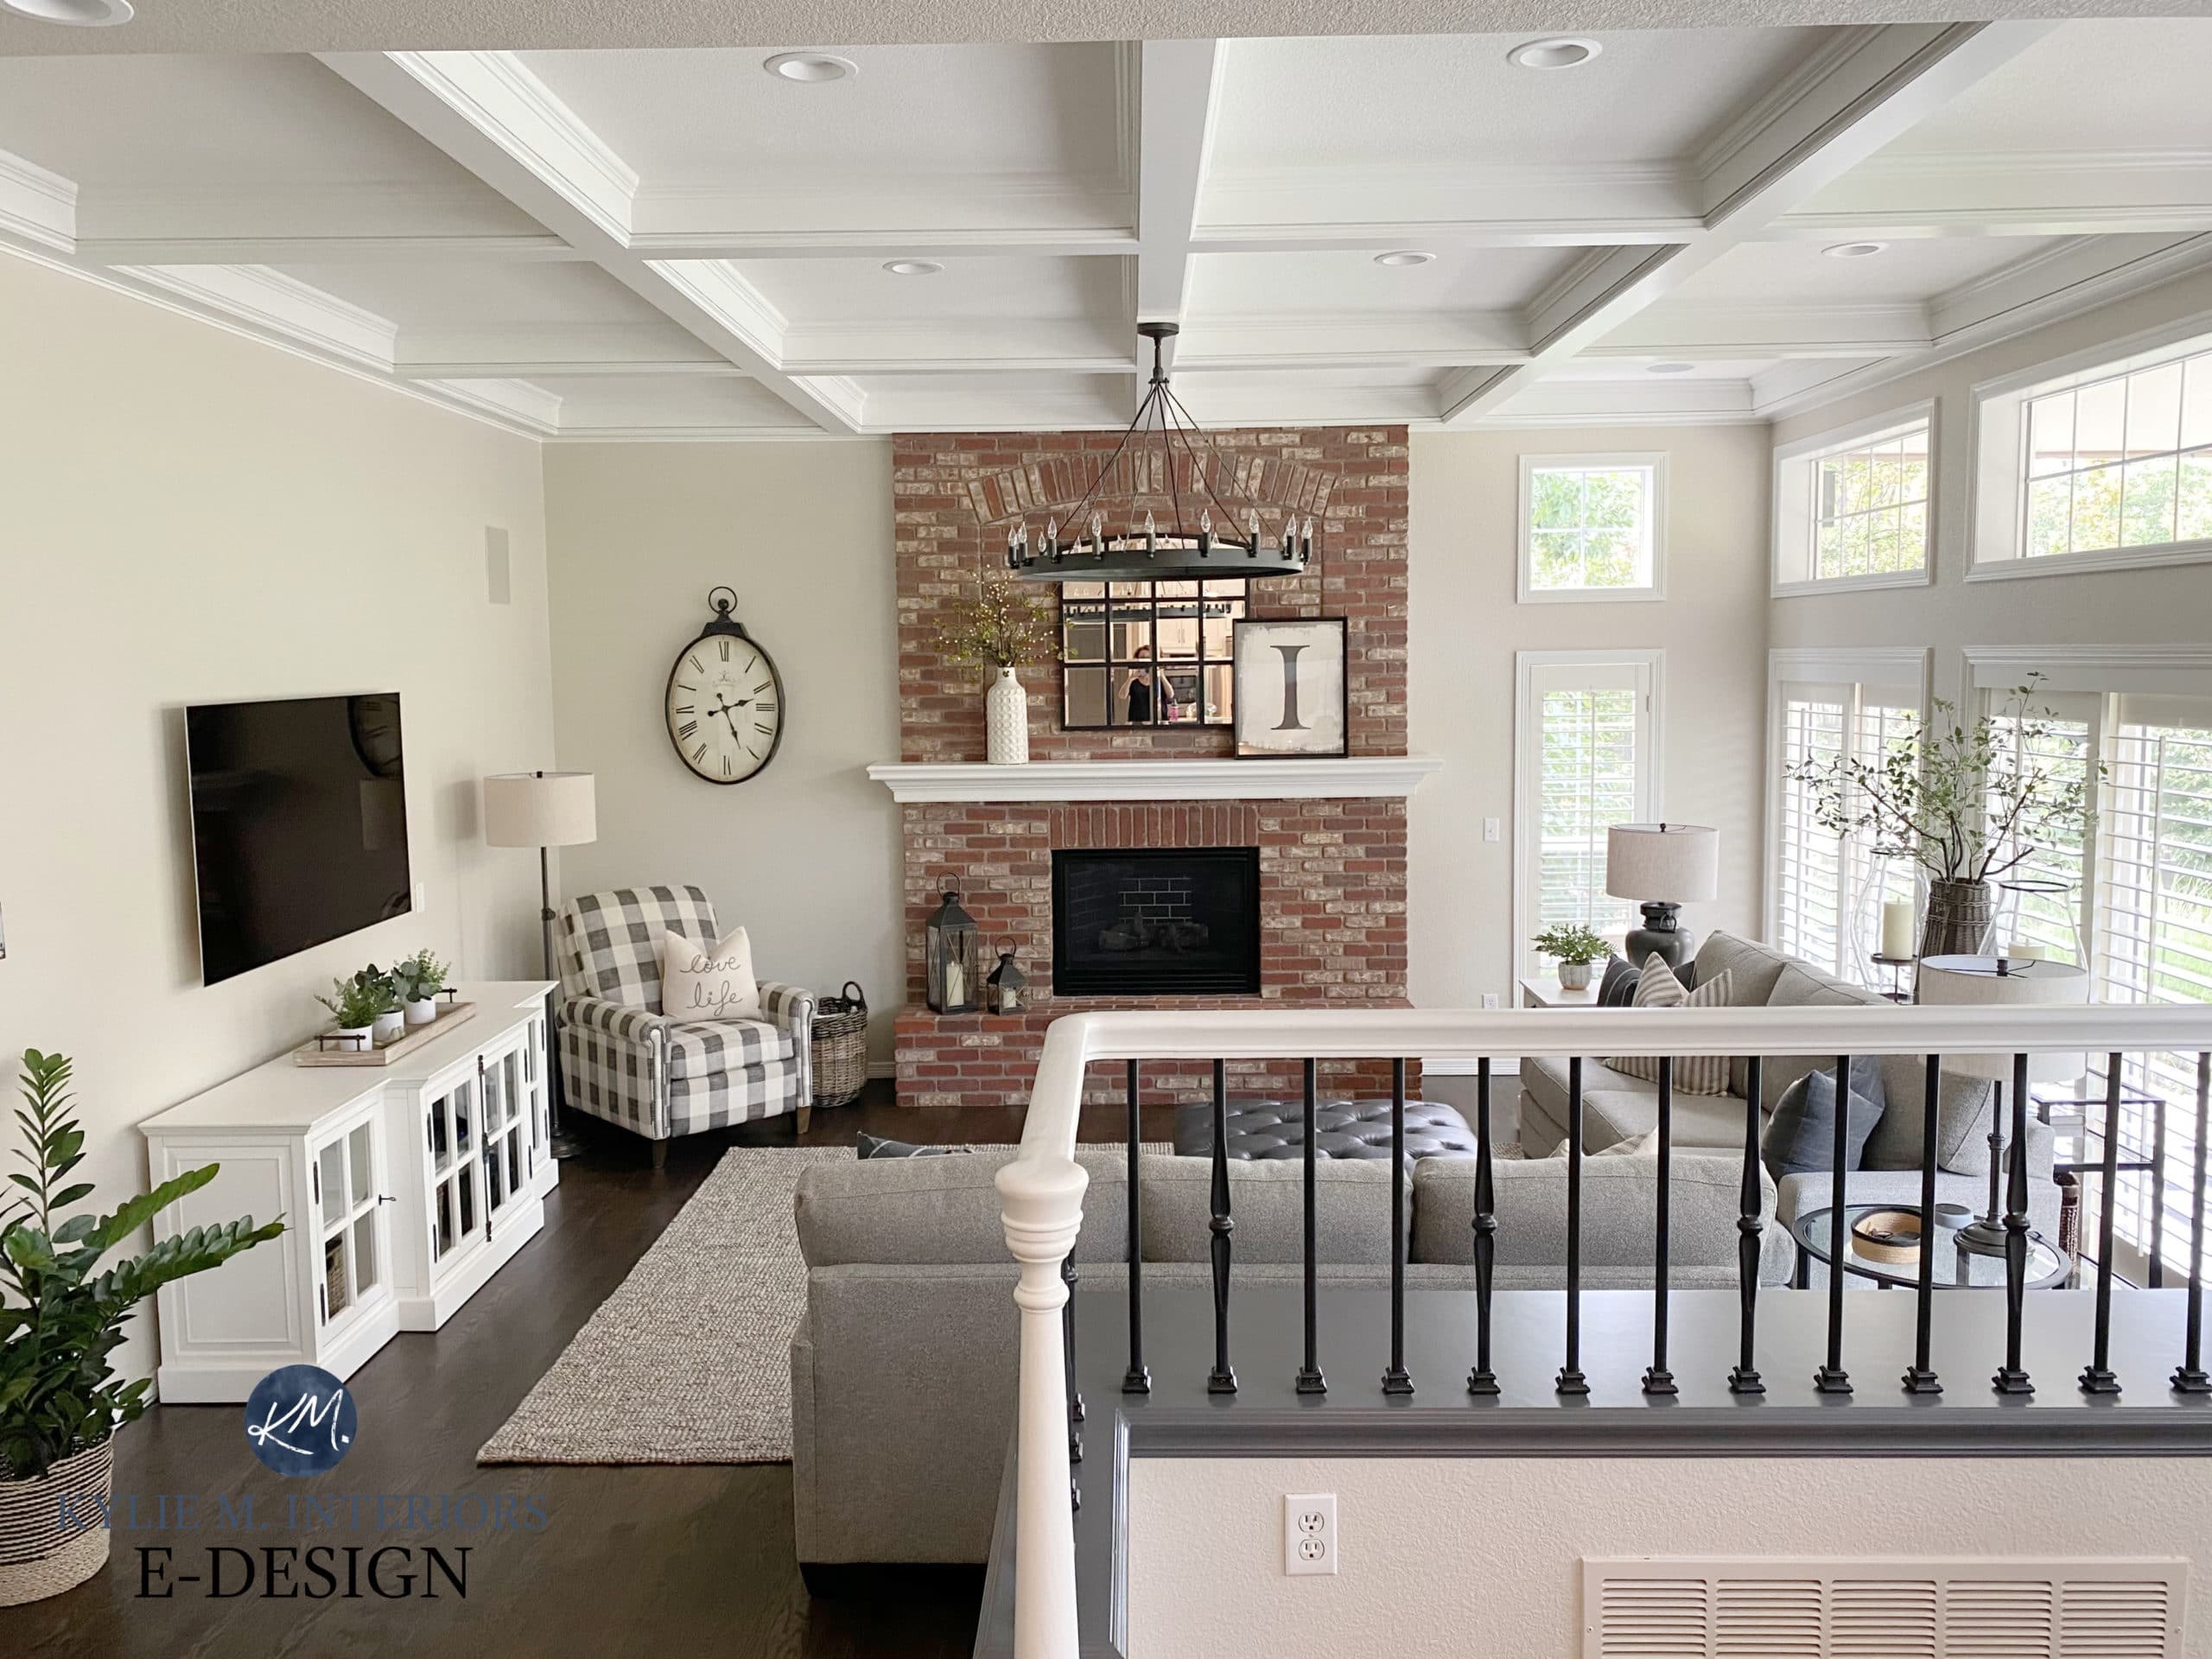 Split-level family room with transitional style home decor and furniture. Red, pink brick fireplace and greige walls, white trim. Kylie M Interiors Edesign. Benjamin Edgecomb, White